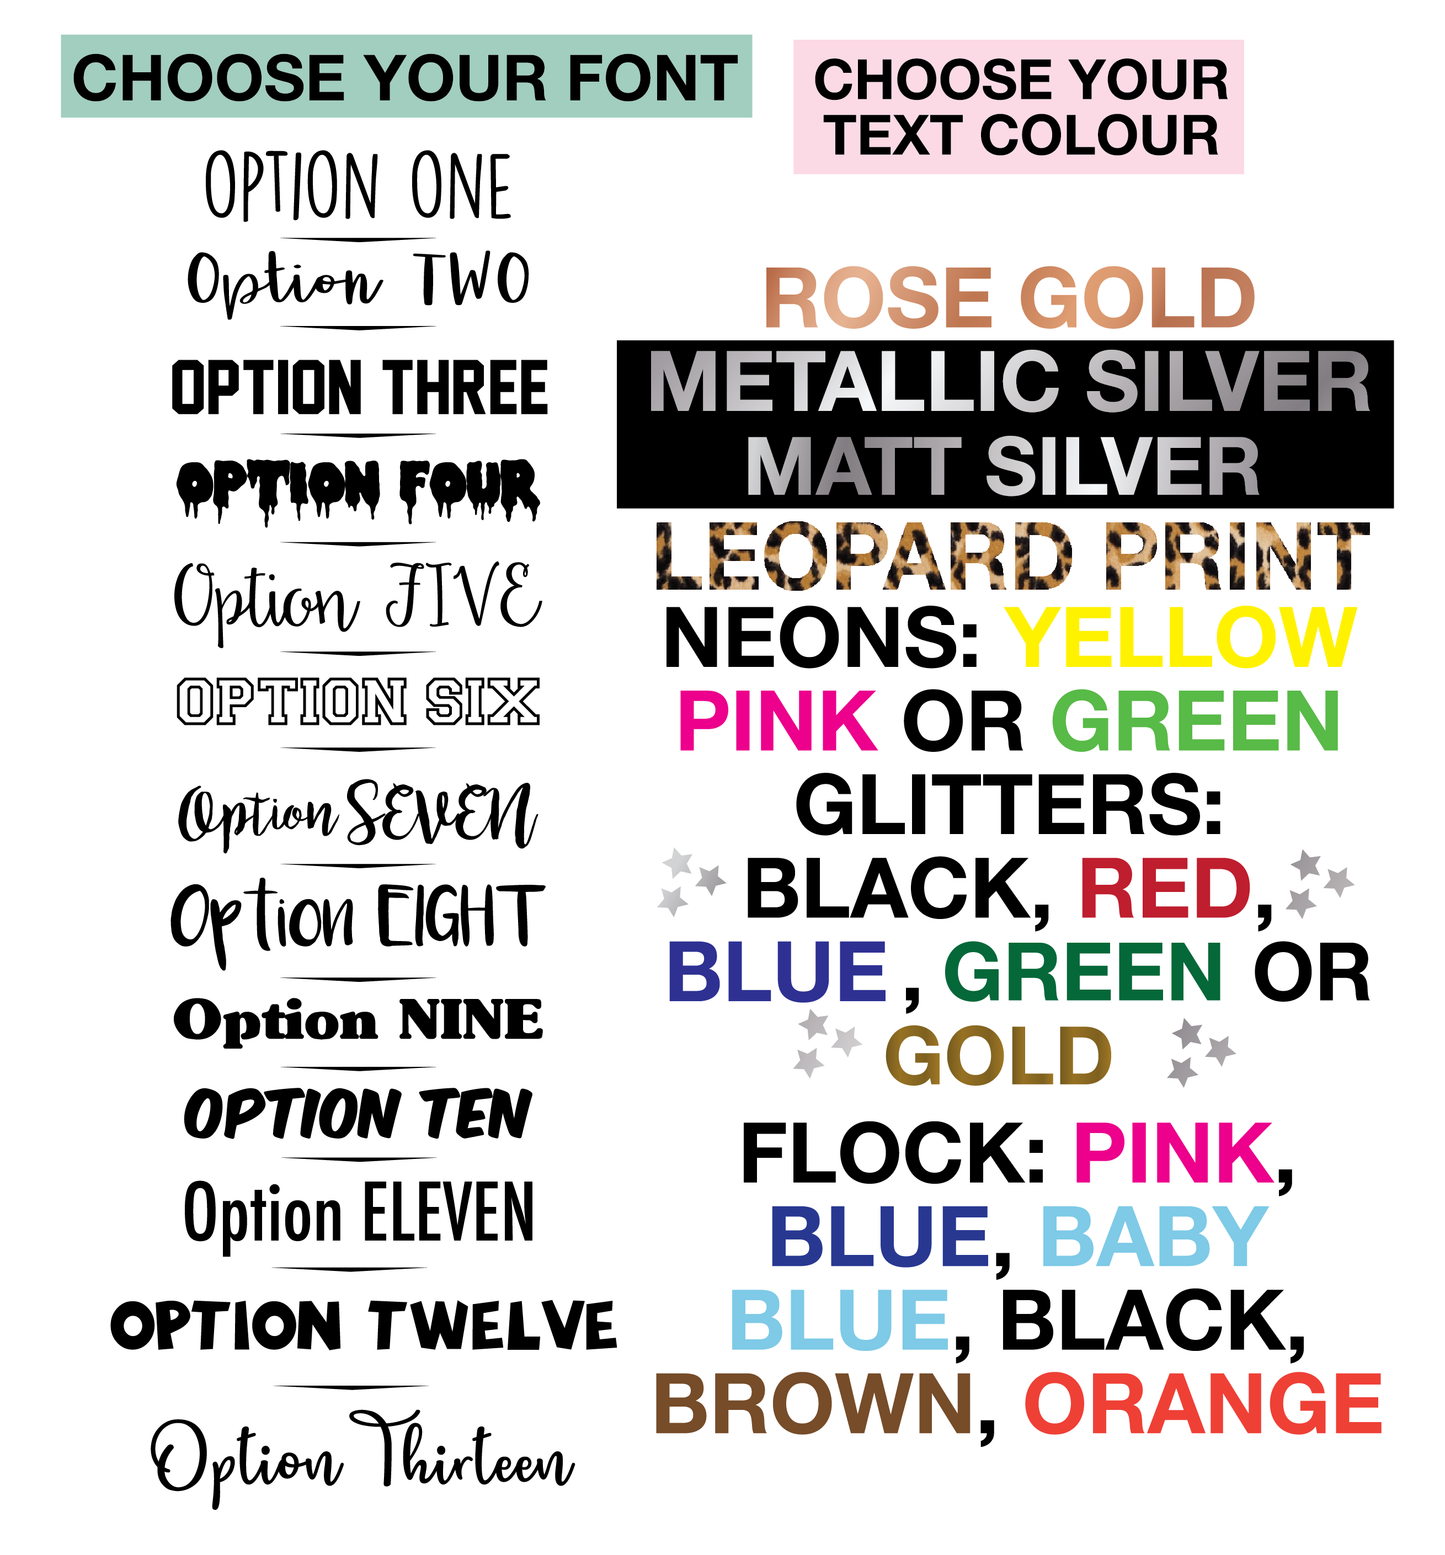 Premium custom order any text colour and font | Adult's sweater